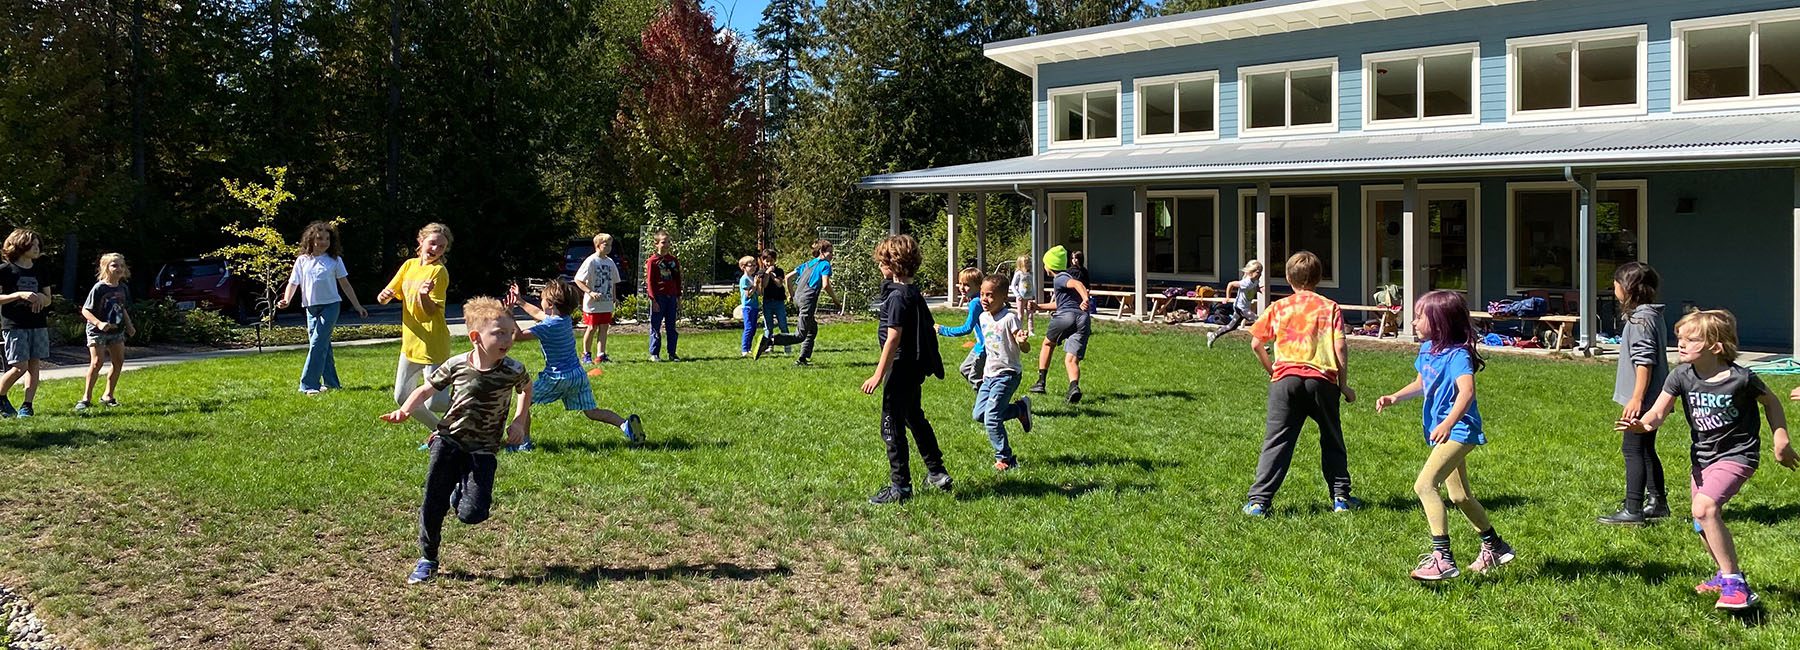 Elementary students playing outside